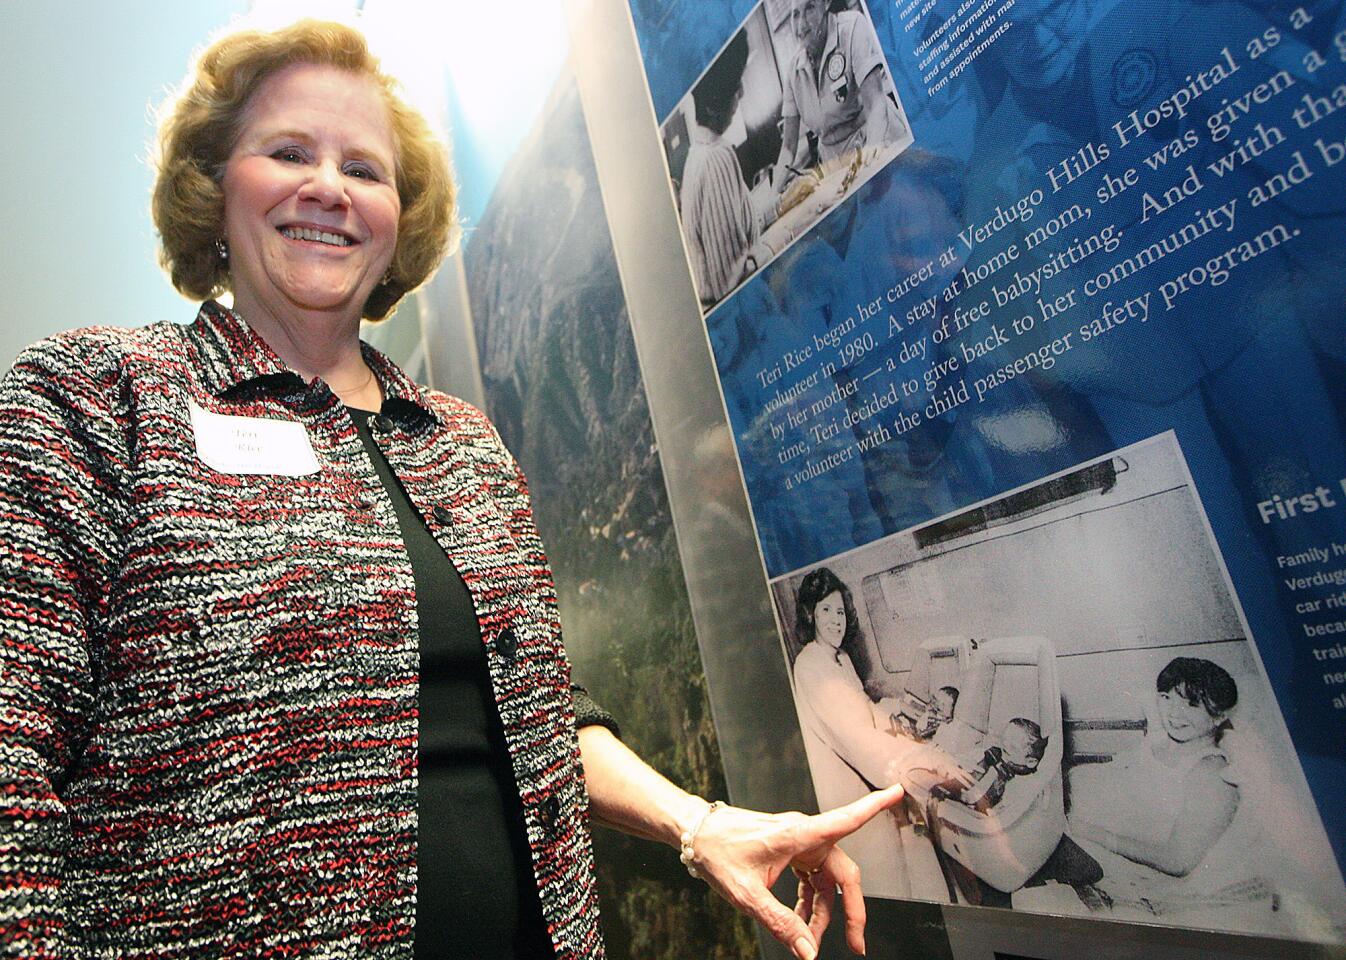 Photo Gallery: Verdugo Hills Hospital history wall unveiling